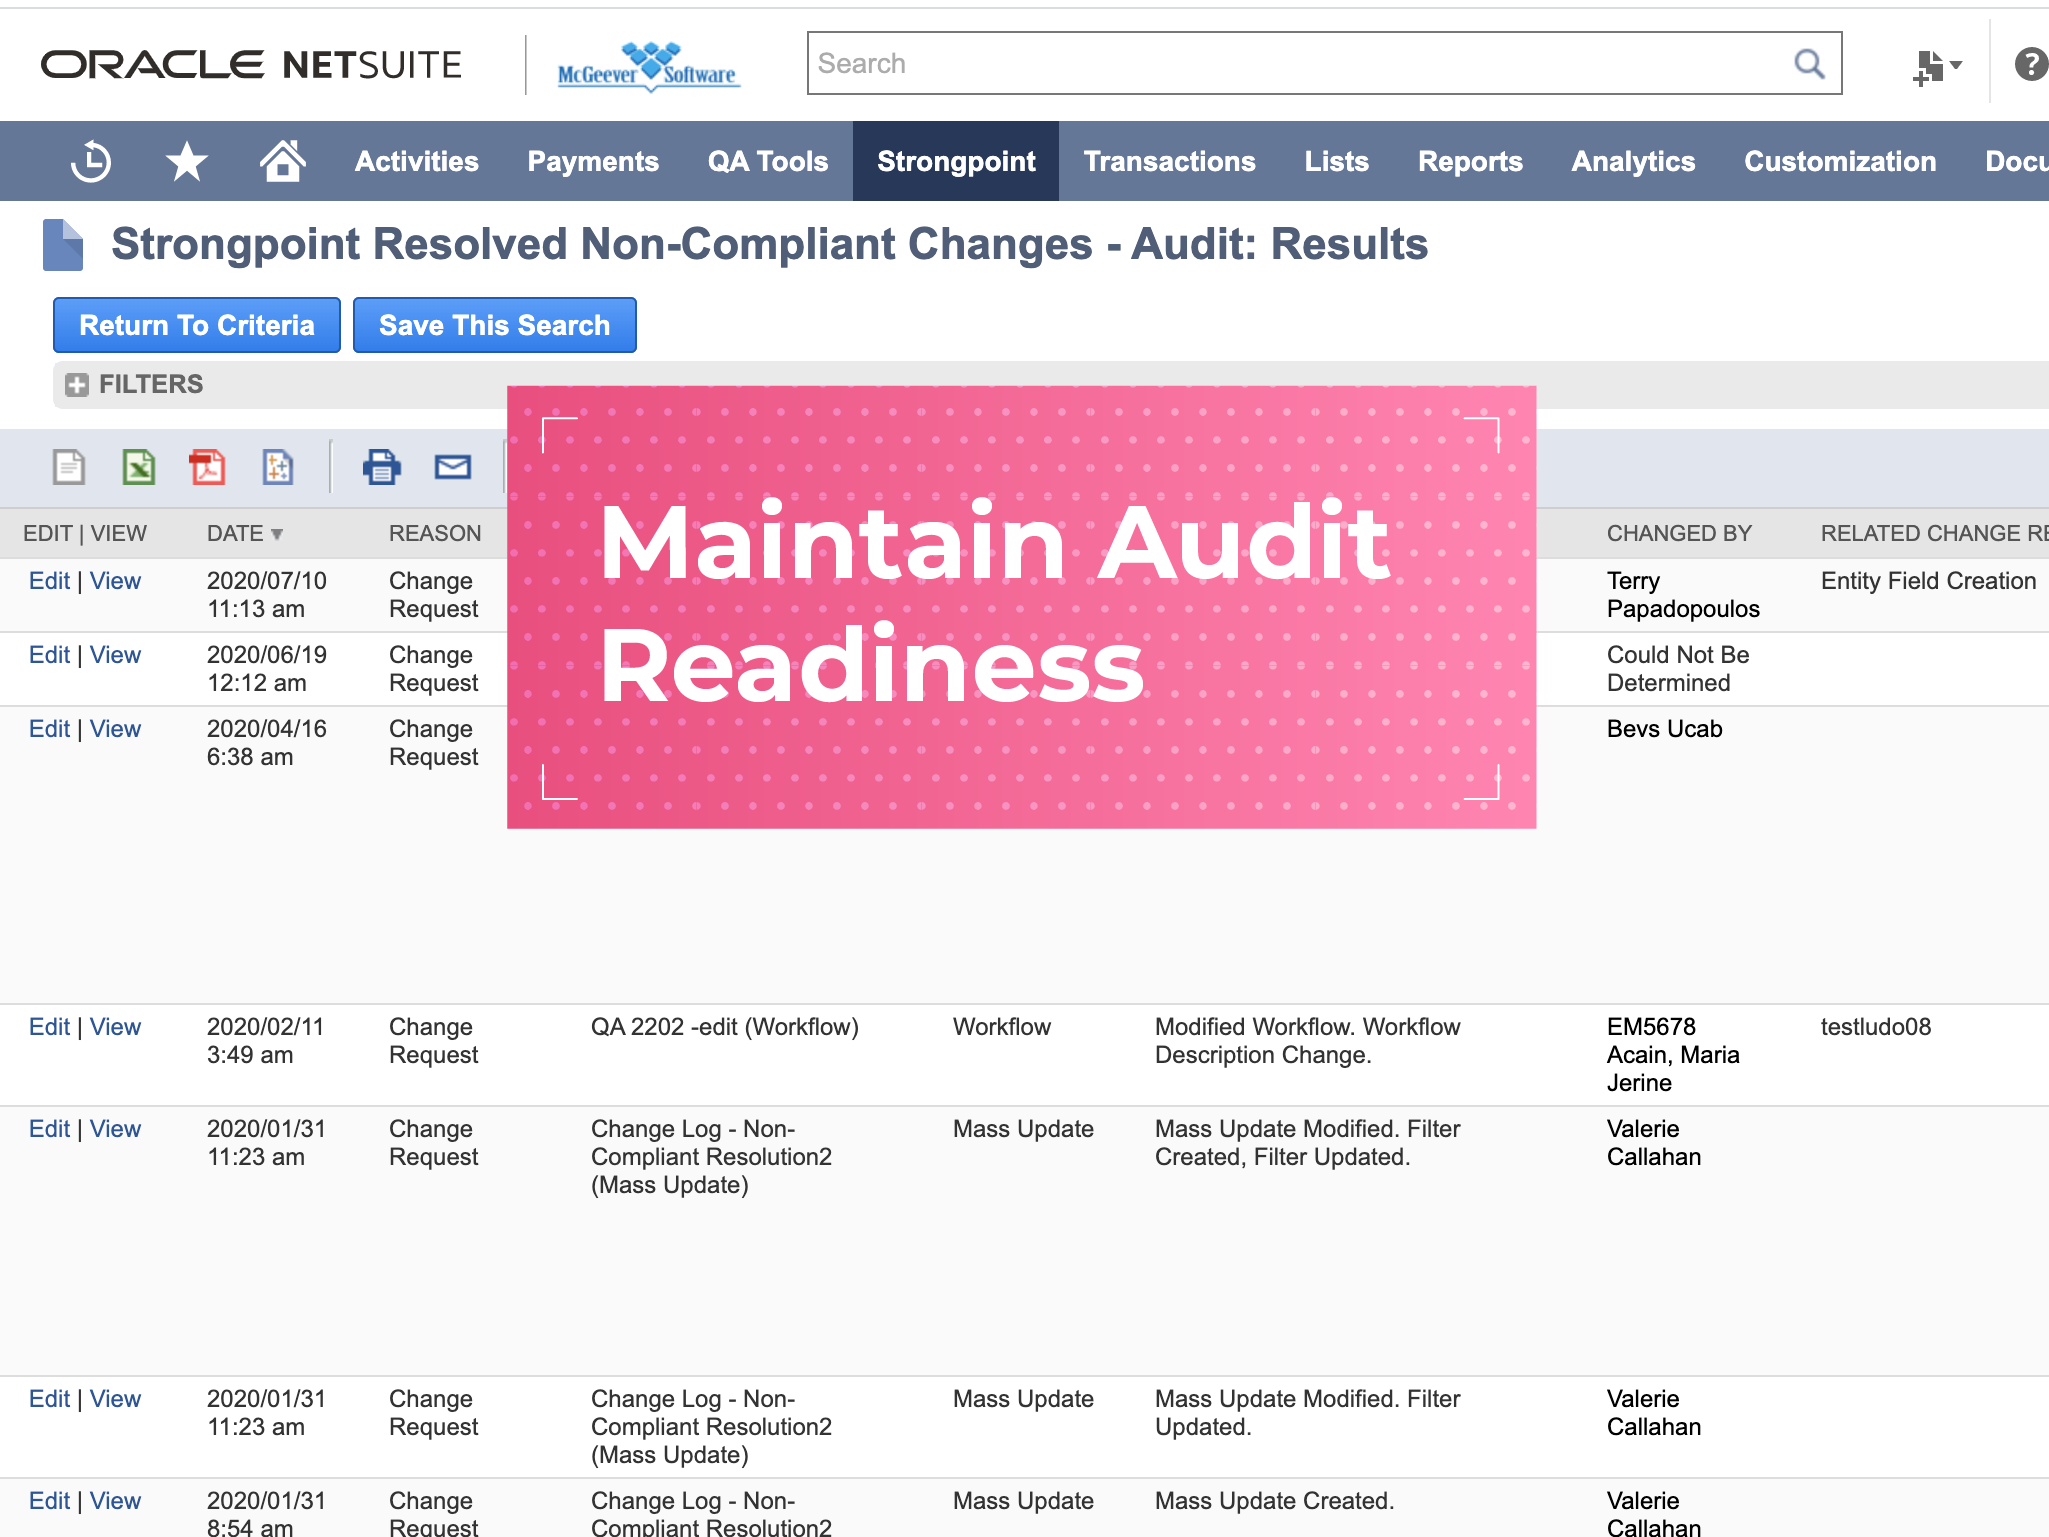 Demonstrate to auditors that noncompliant changes are being identified and resolved